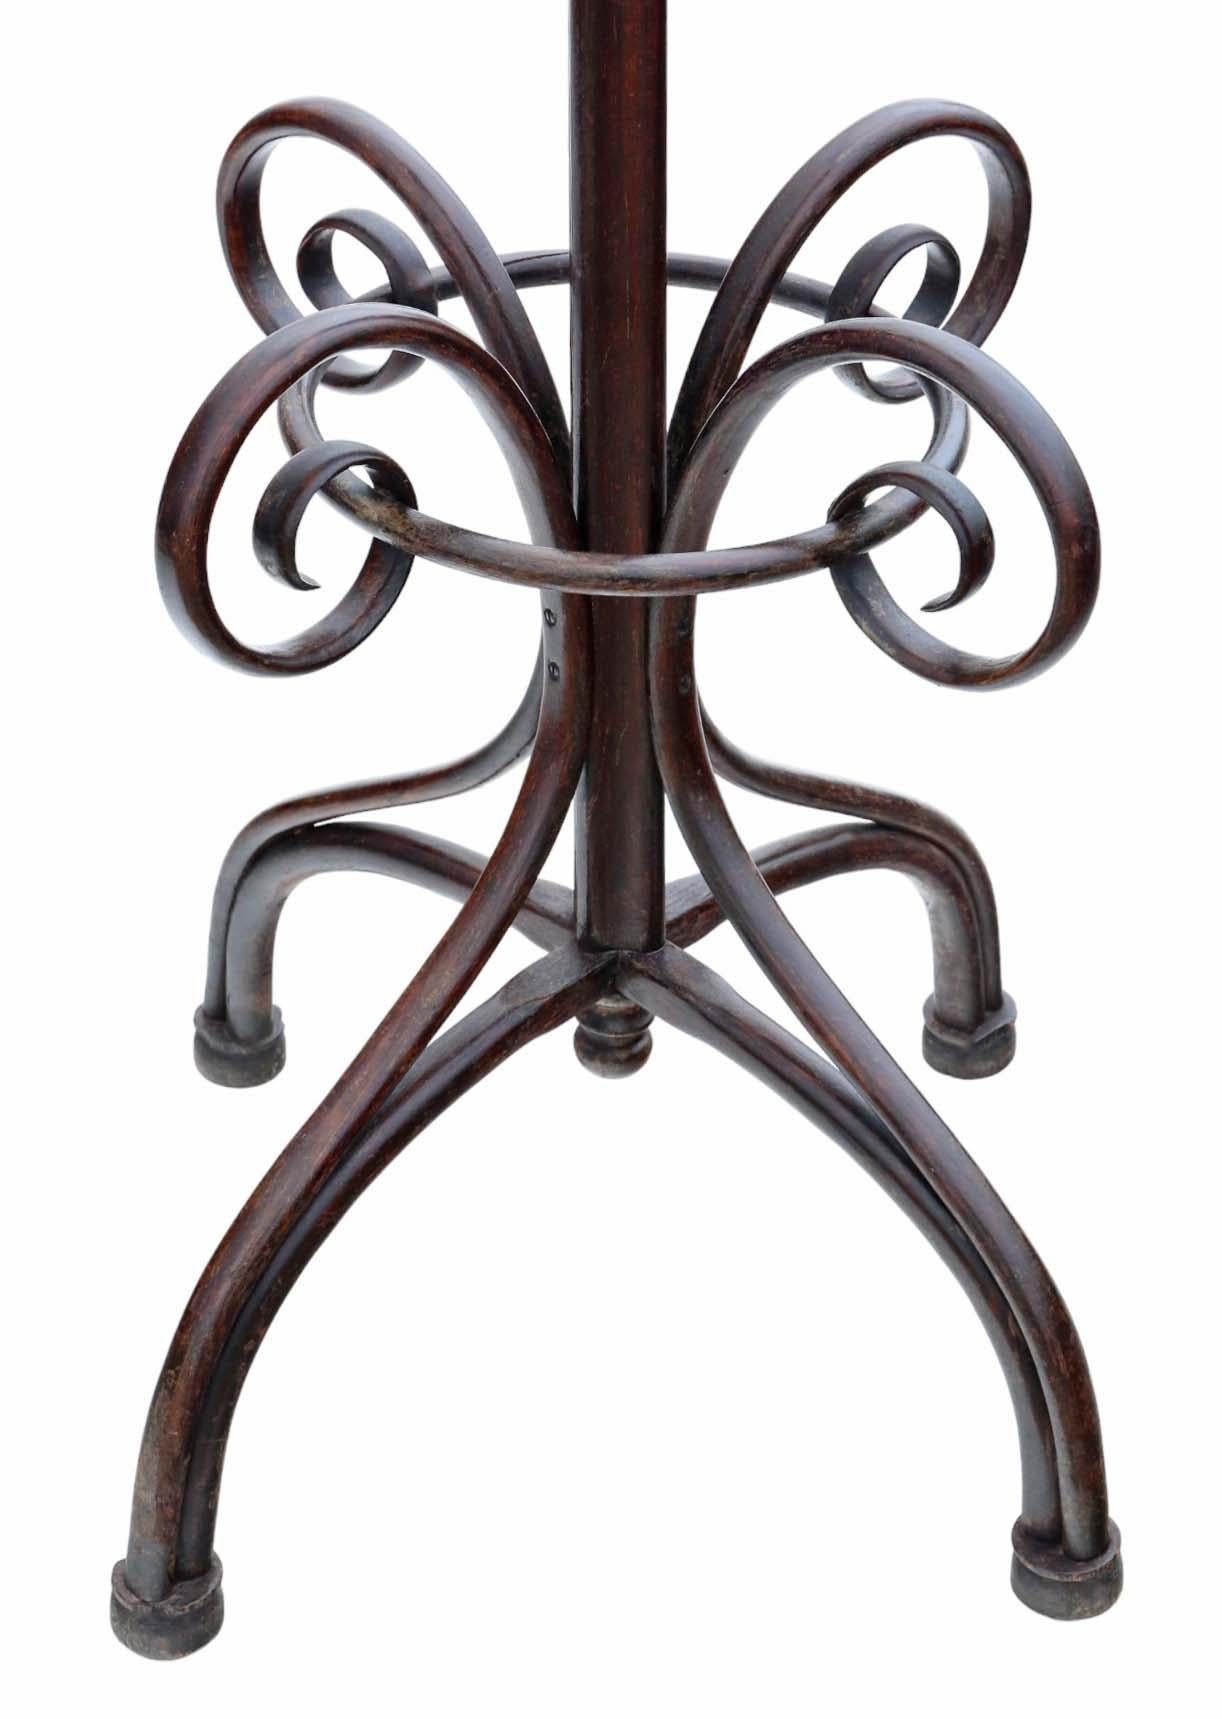 Antique C1900 large quality bentwood hall, coat or hat stand In Good Condition For Sale In Wisbech, Cambridgeshire